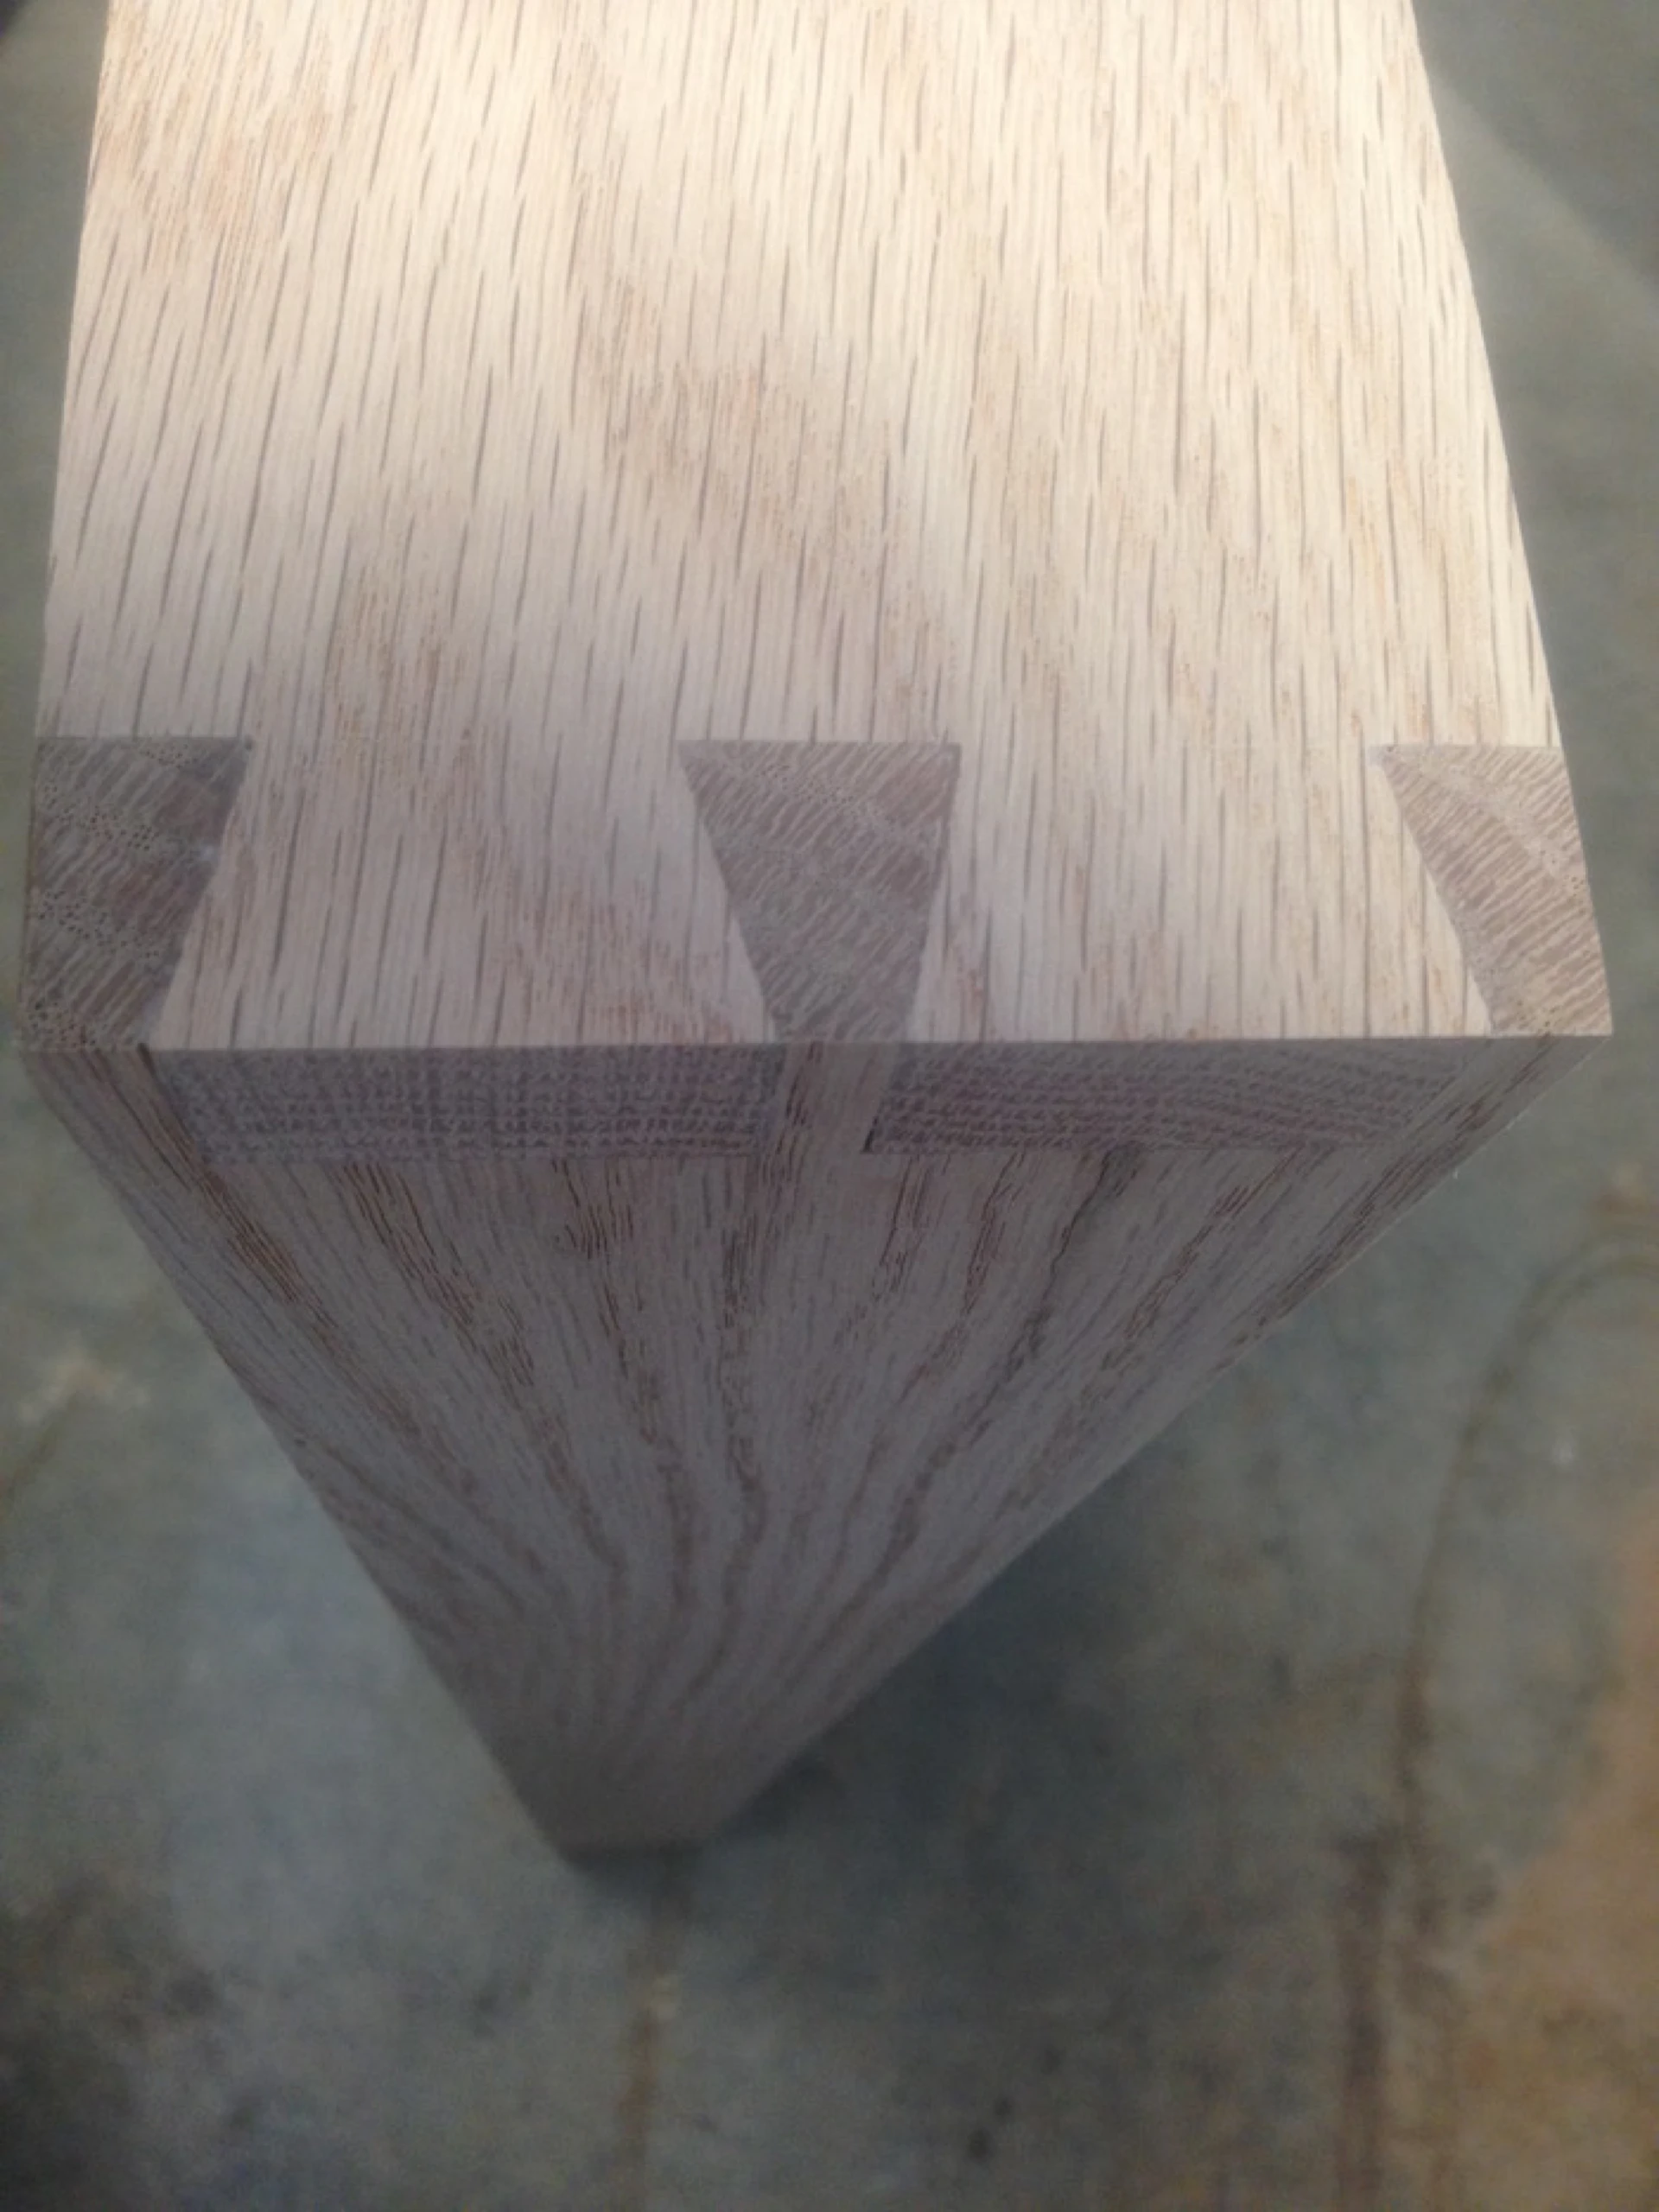 Completed Dovetail